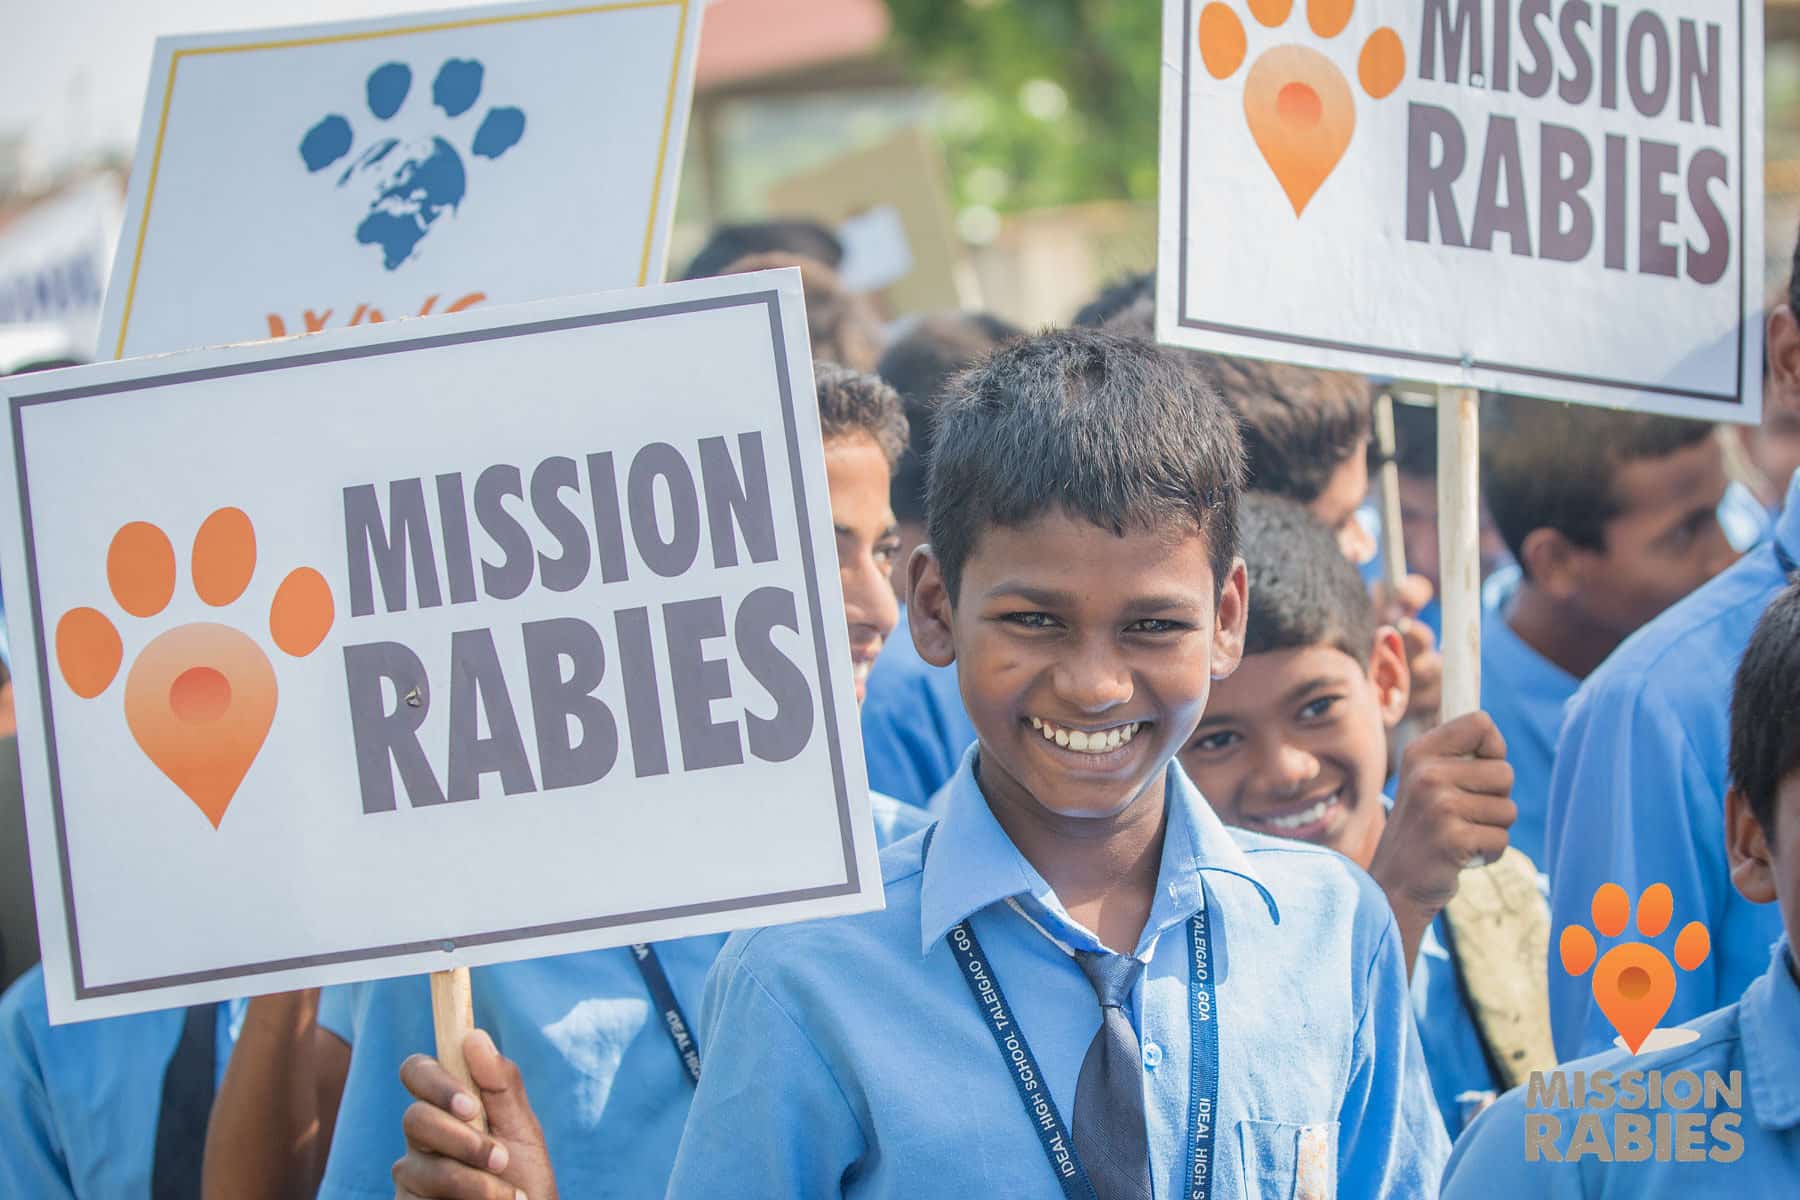 Child holding Mission Rabies placard